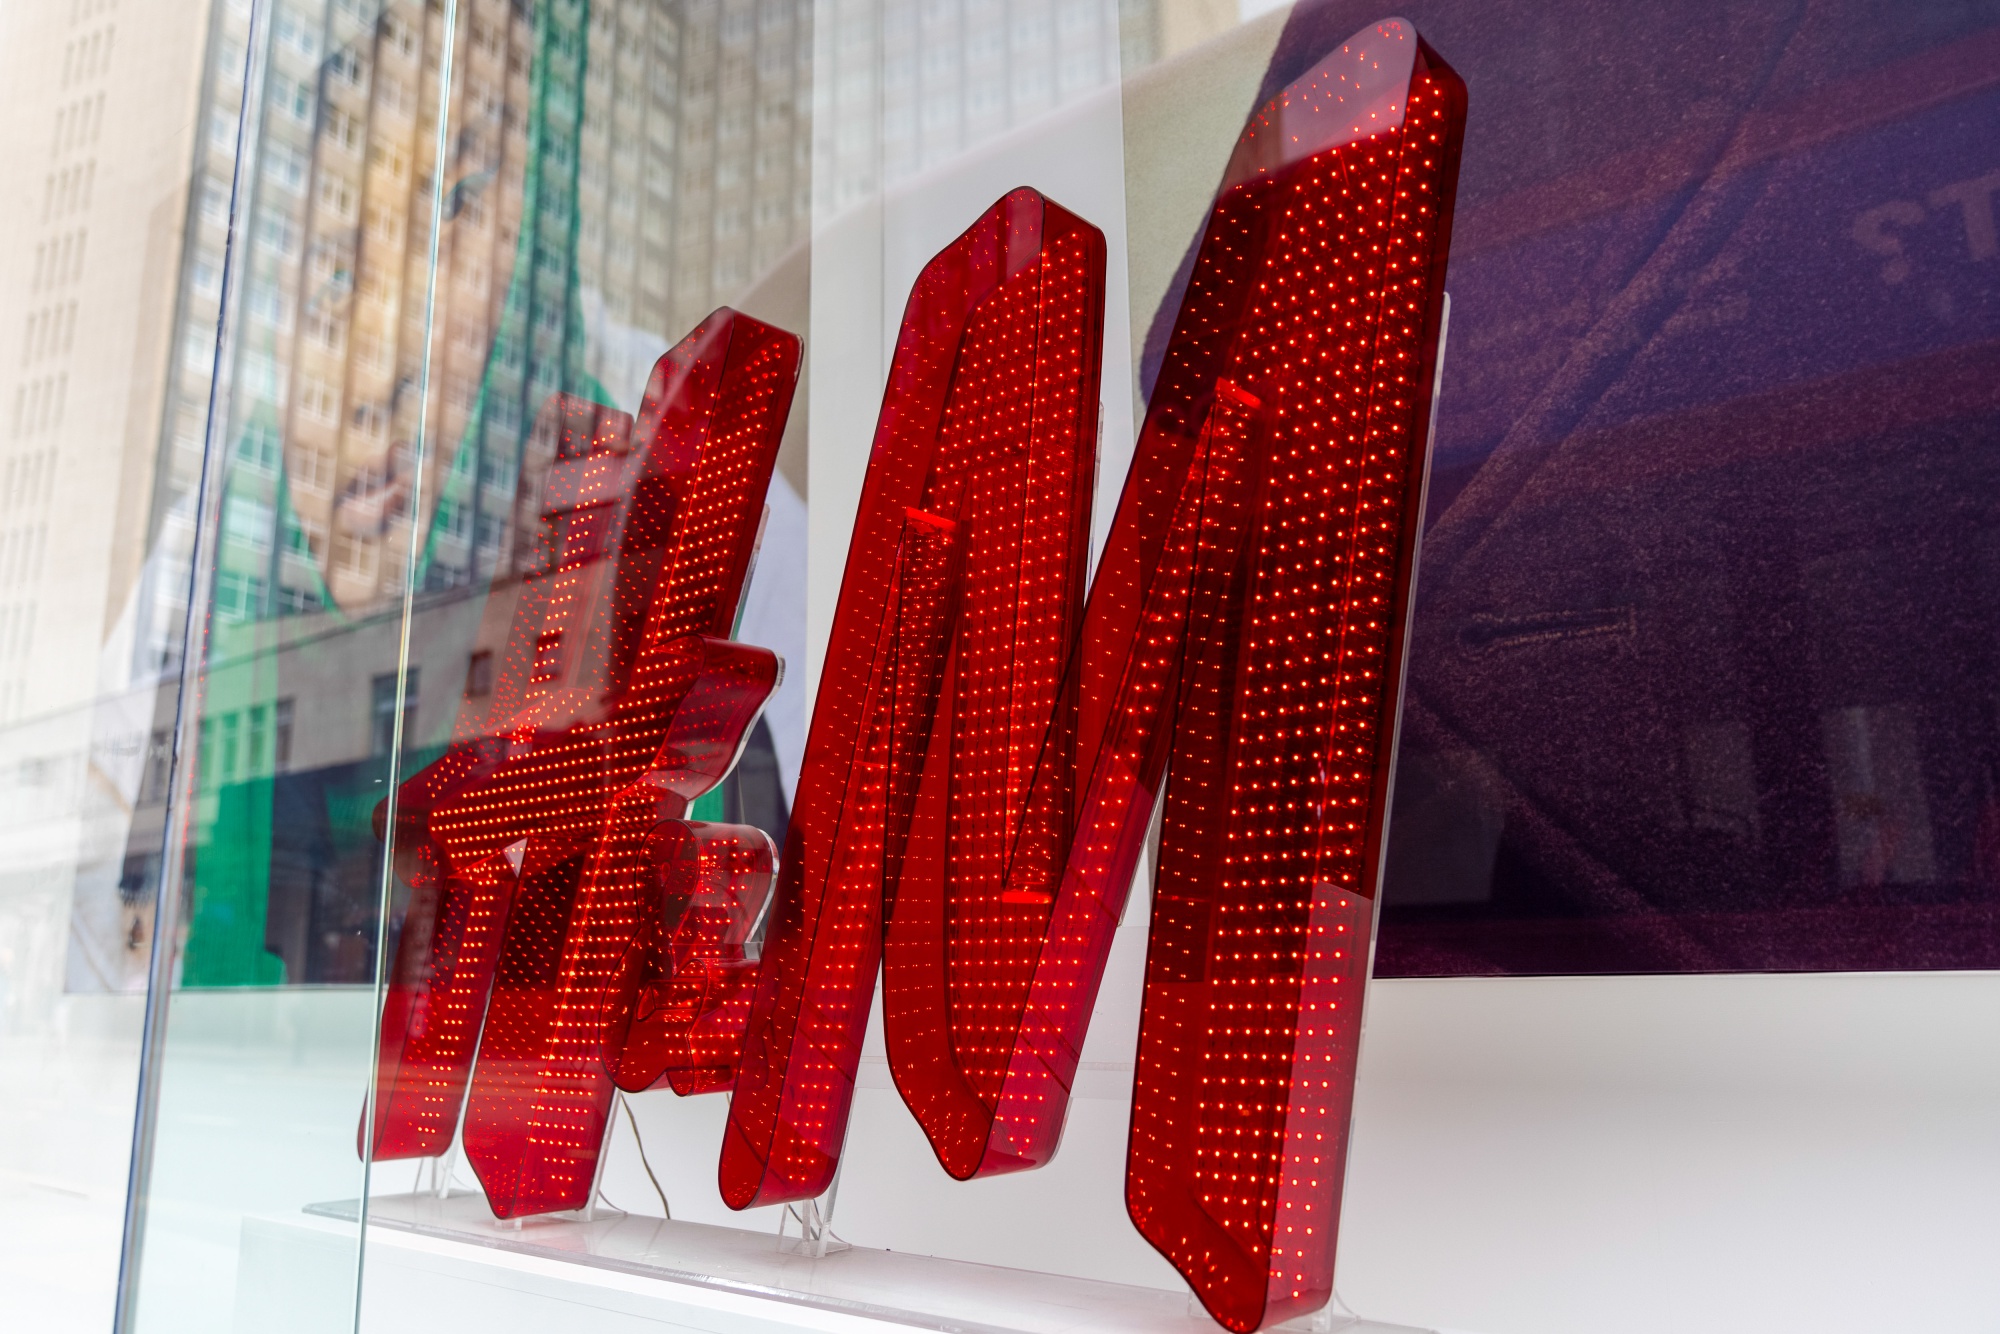 H&M: Online Sales Account for 30% of Total Revenue Since 2020